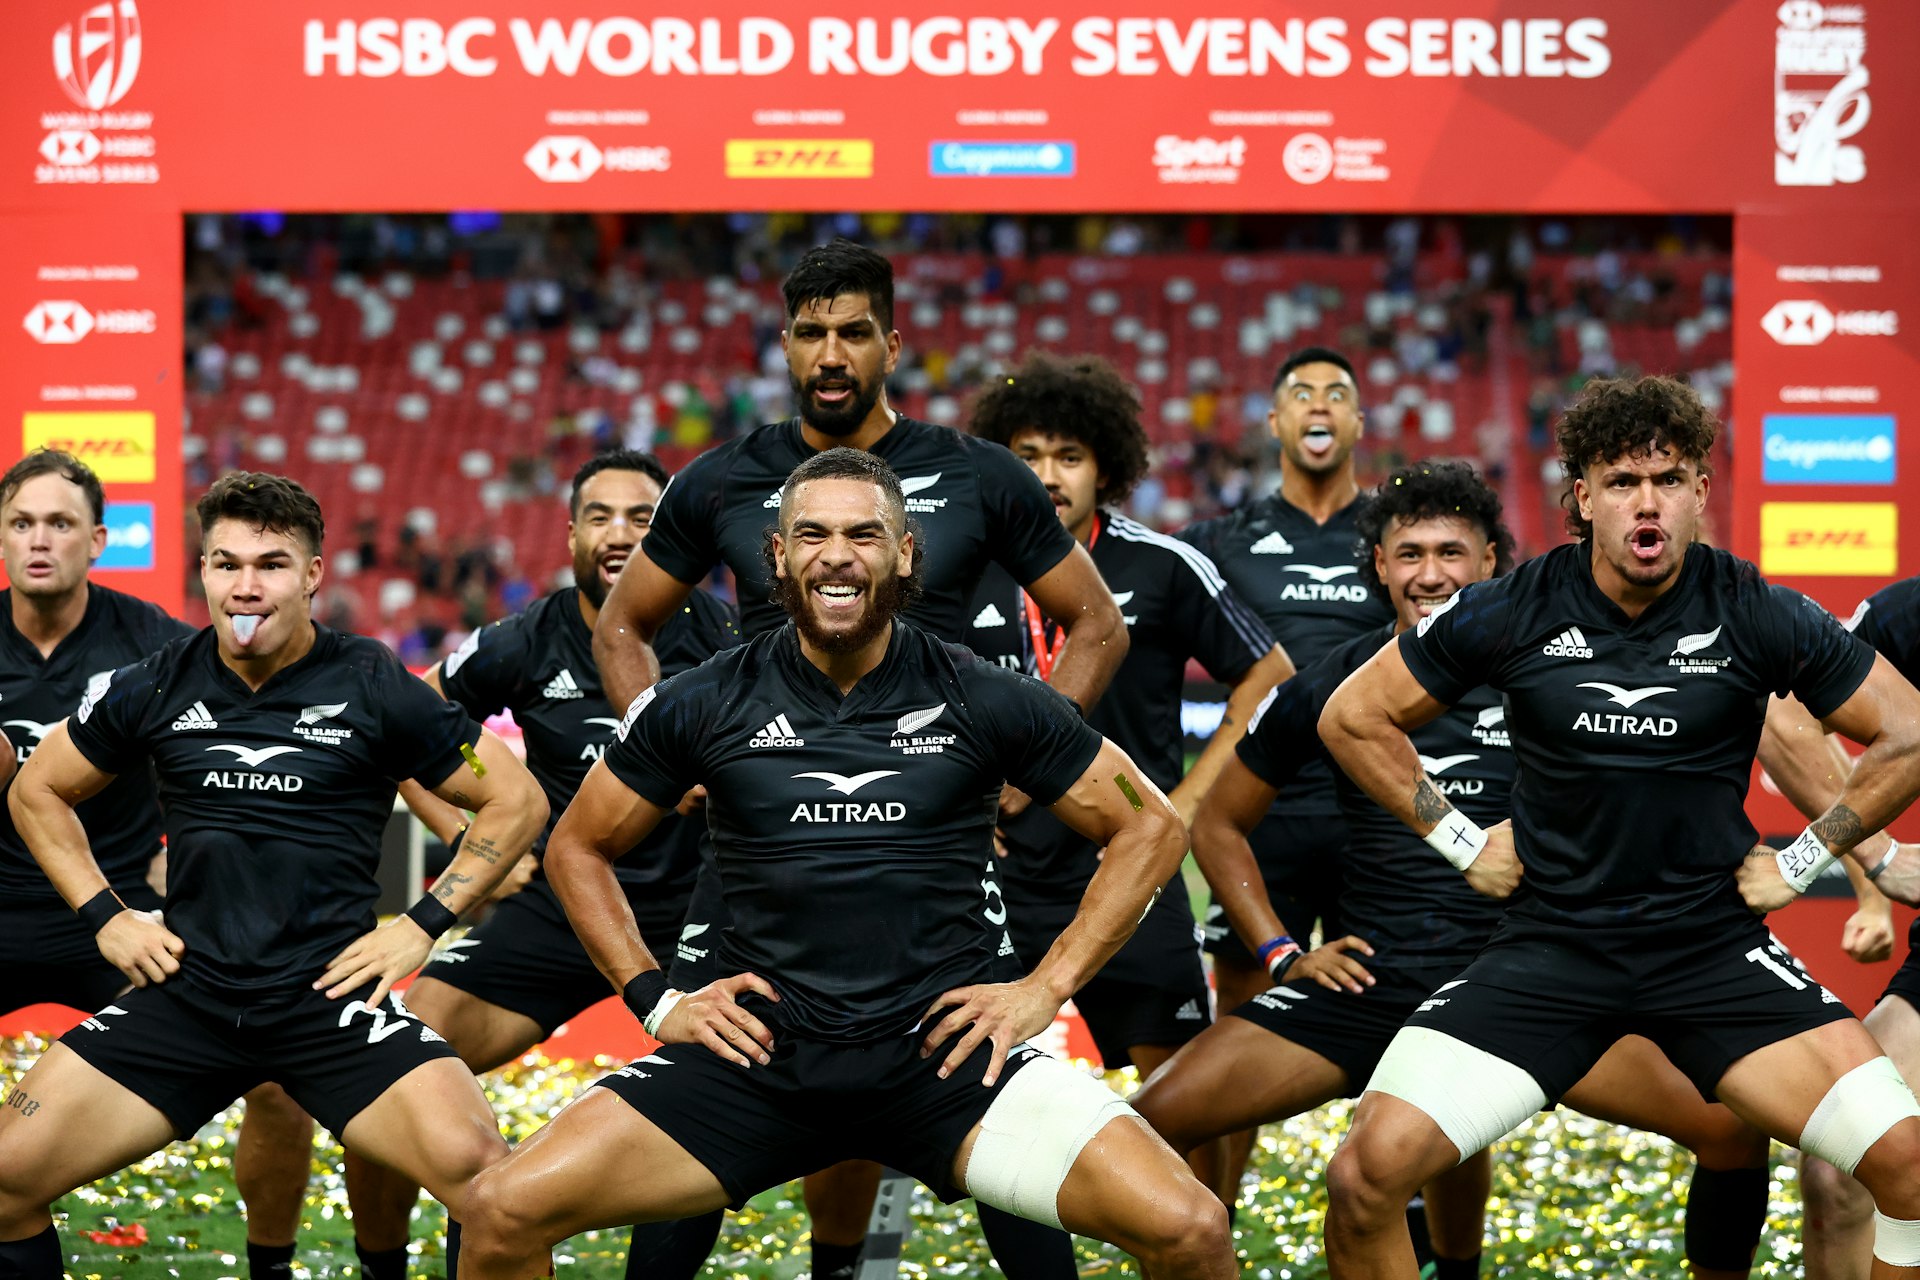 The New Zealand team celebrates with a haka after winning the cup final match against Argentina during the HSBC Singapore Rugby Sevens at the National Stadium on April 09, 2023 in Singapore.